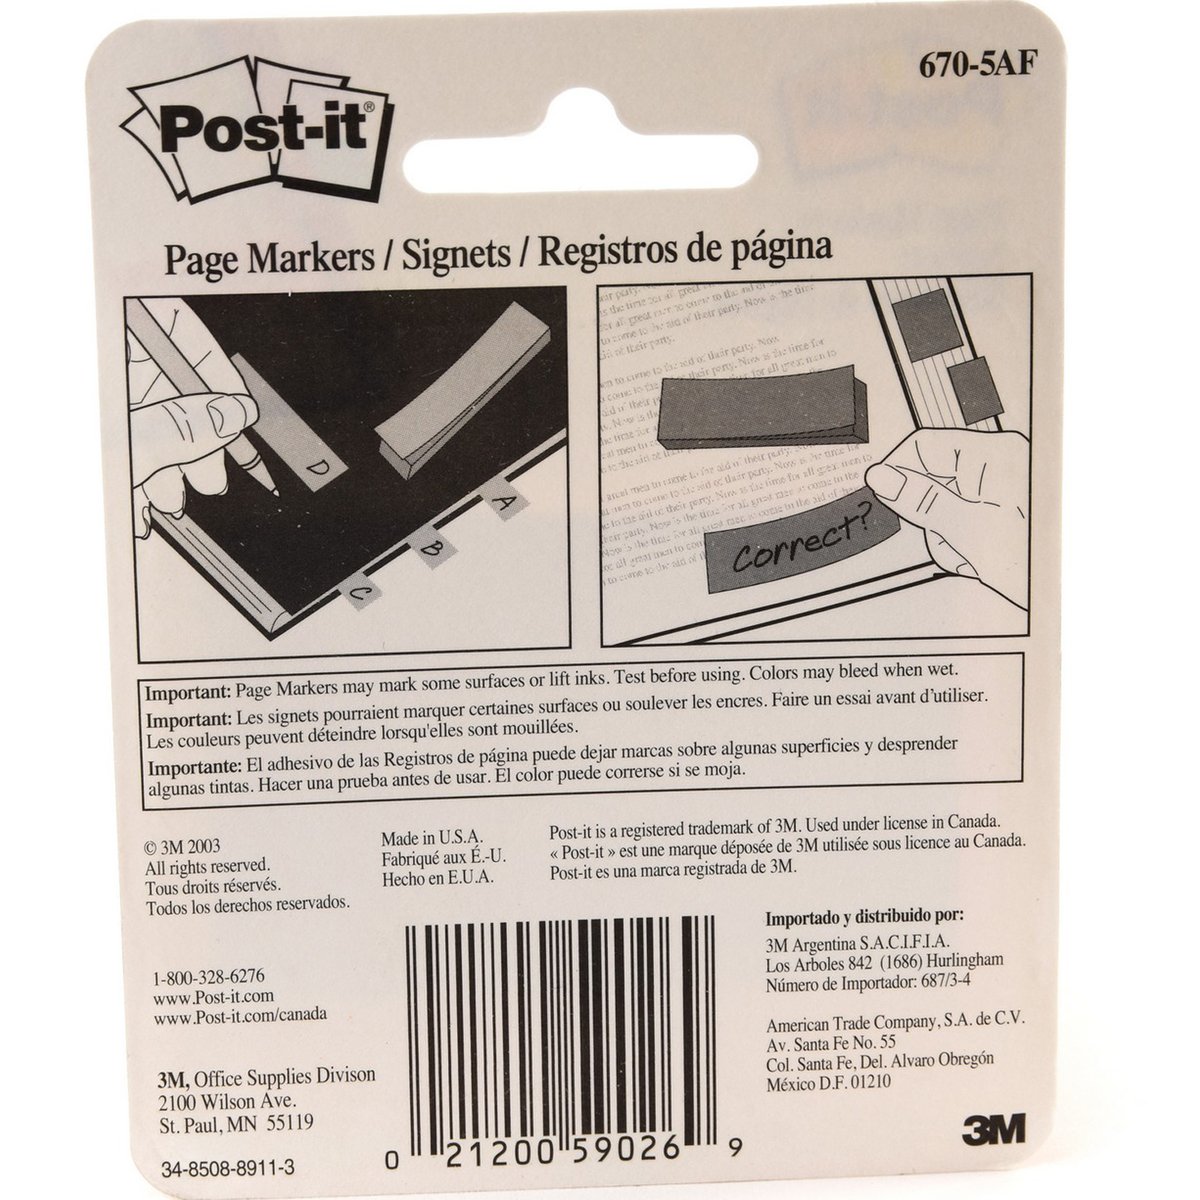  Post-it® Page Markers, 1/2-inch x 1-3/4 Inch, Ideal